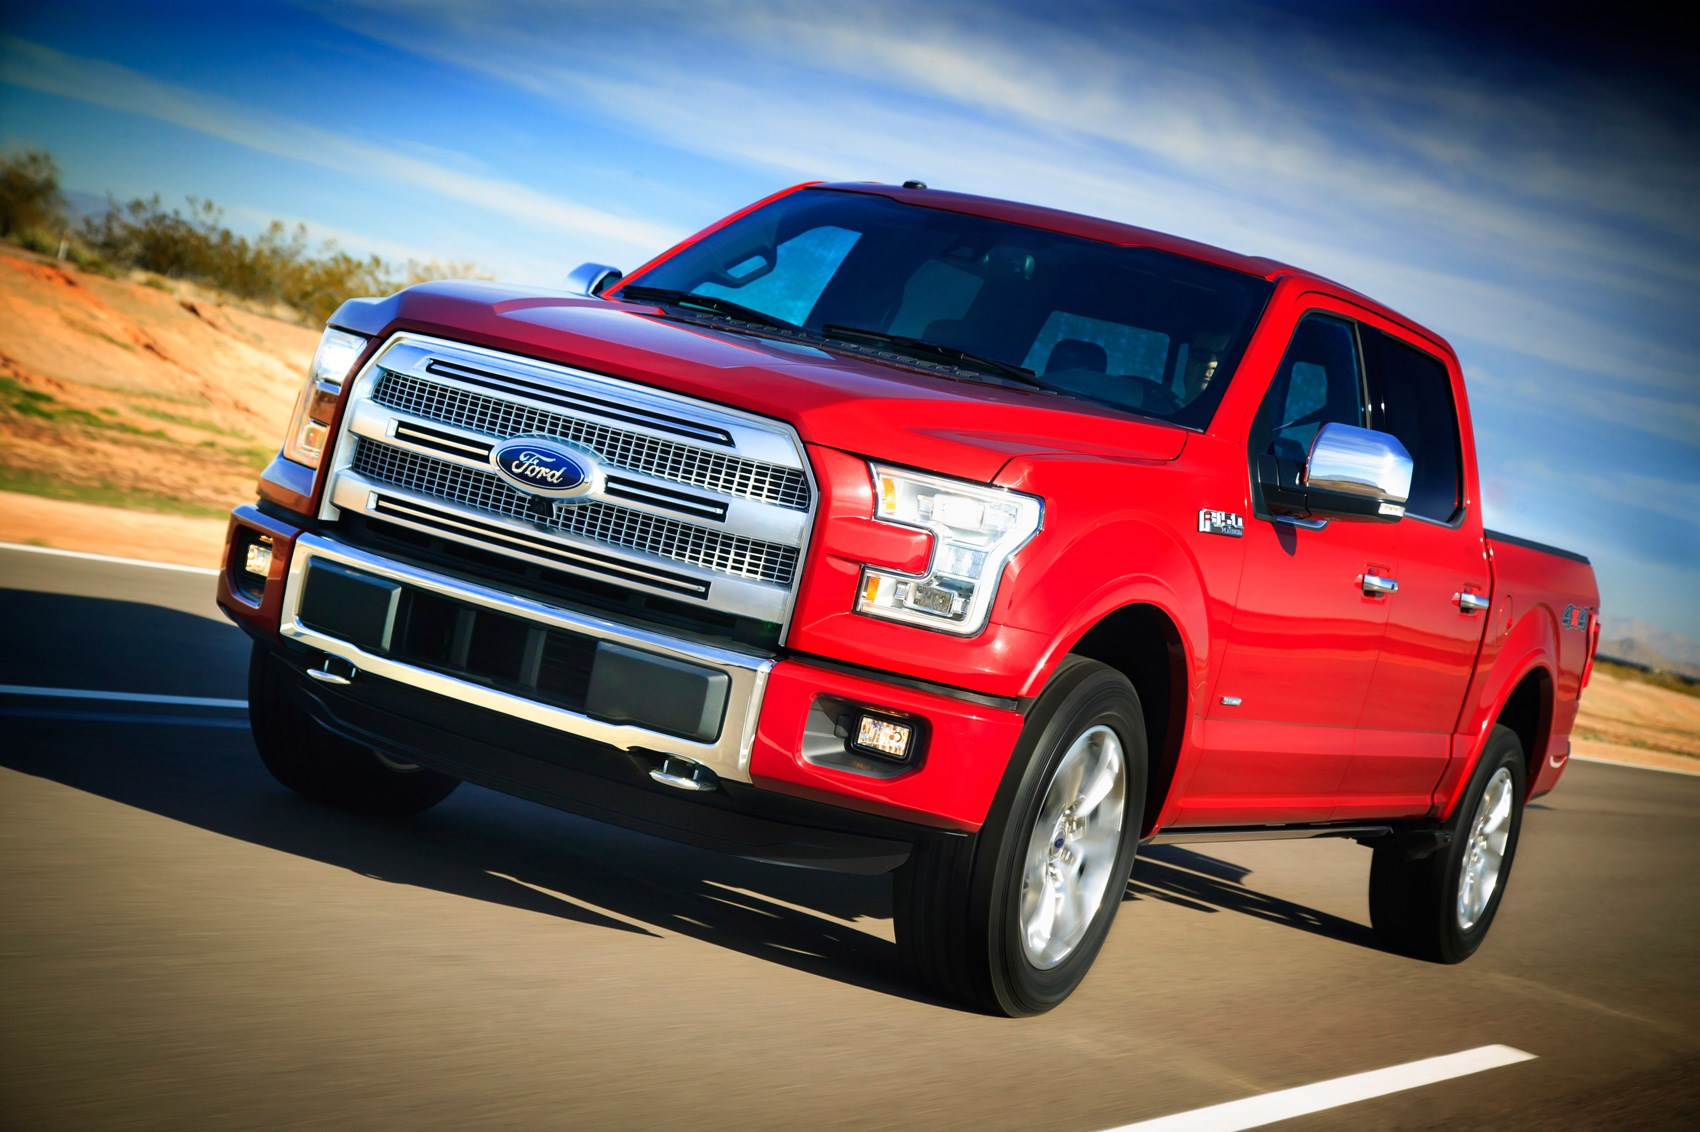 22+ 2016 ford f 150 platinum features ideas in 2021 